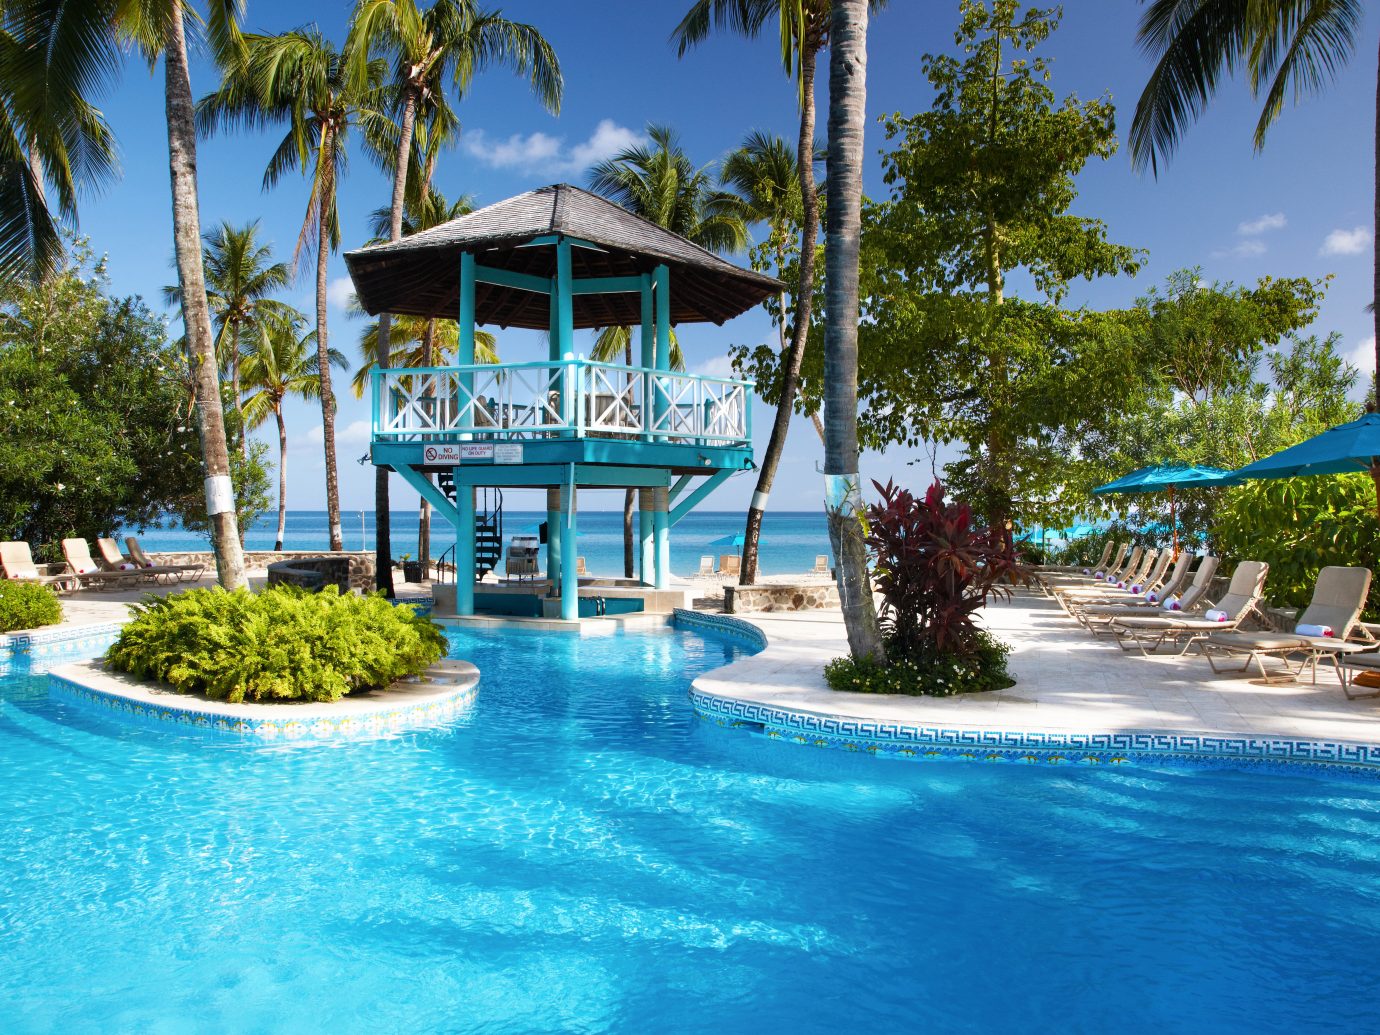 The Best AdultsOnly AllInclusive Resorts in the Caribbean